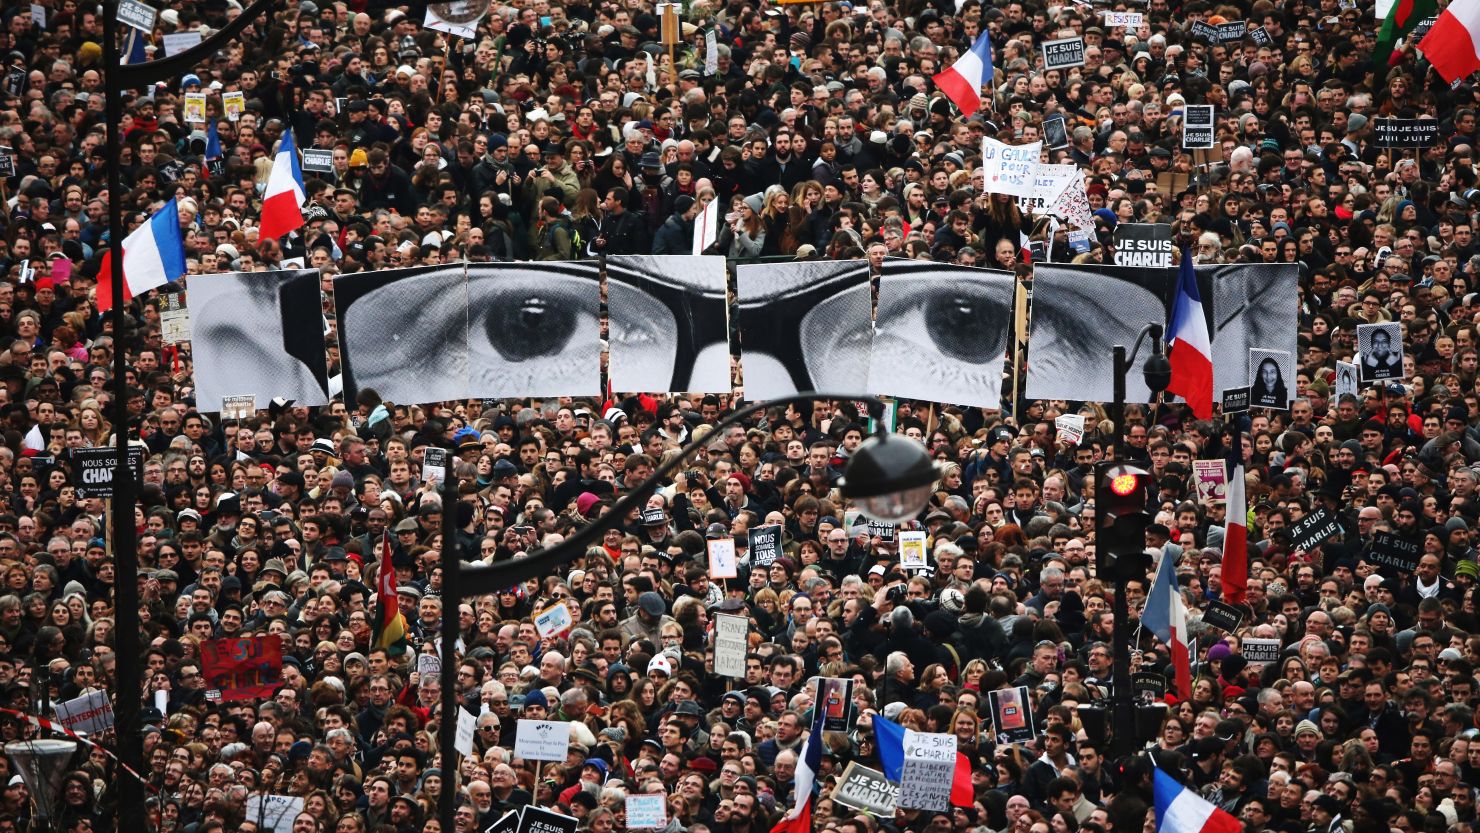 Demonstrators at a rally in Paris following the January terrorist attacks that included a deadly assault on the offices of the satirical magazine Charlie Hebdo.